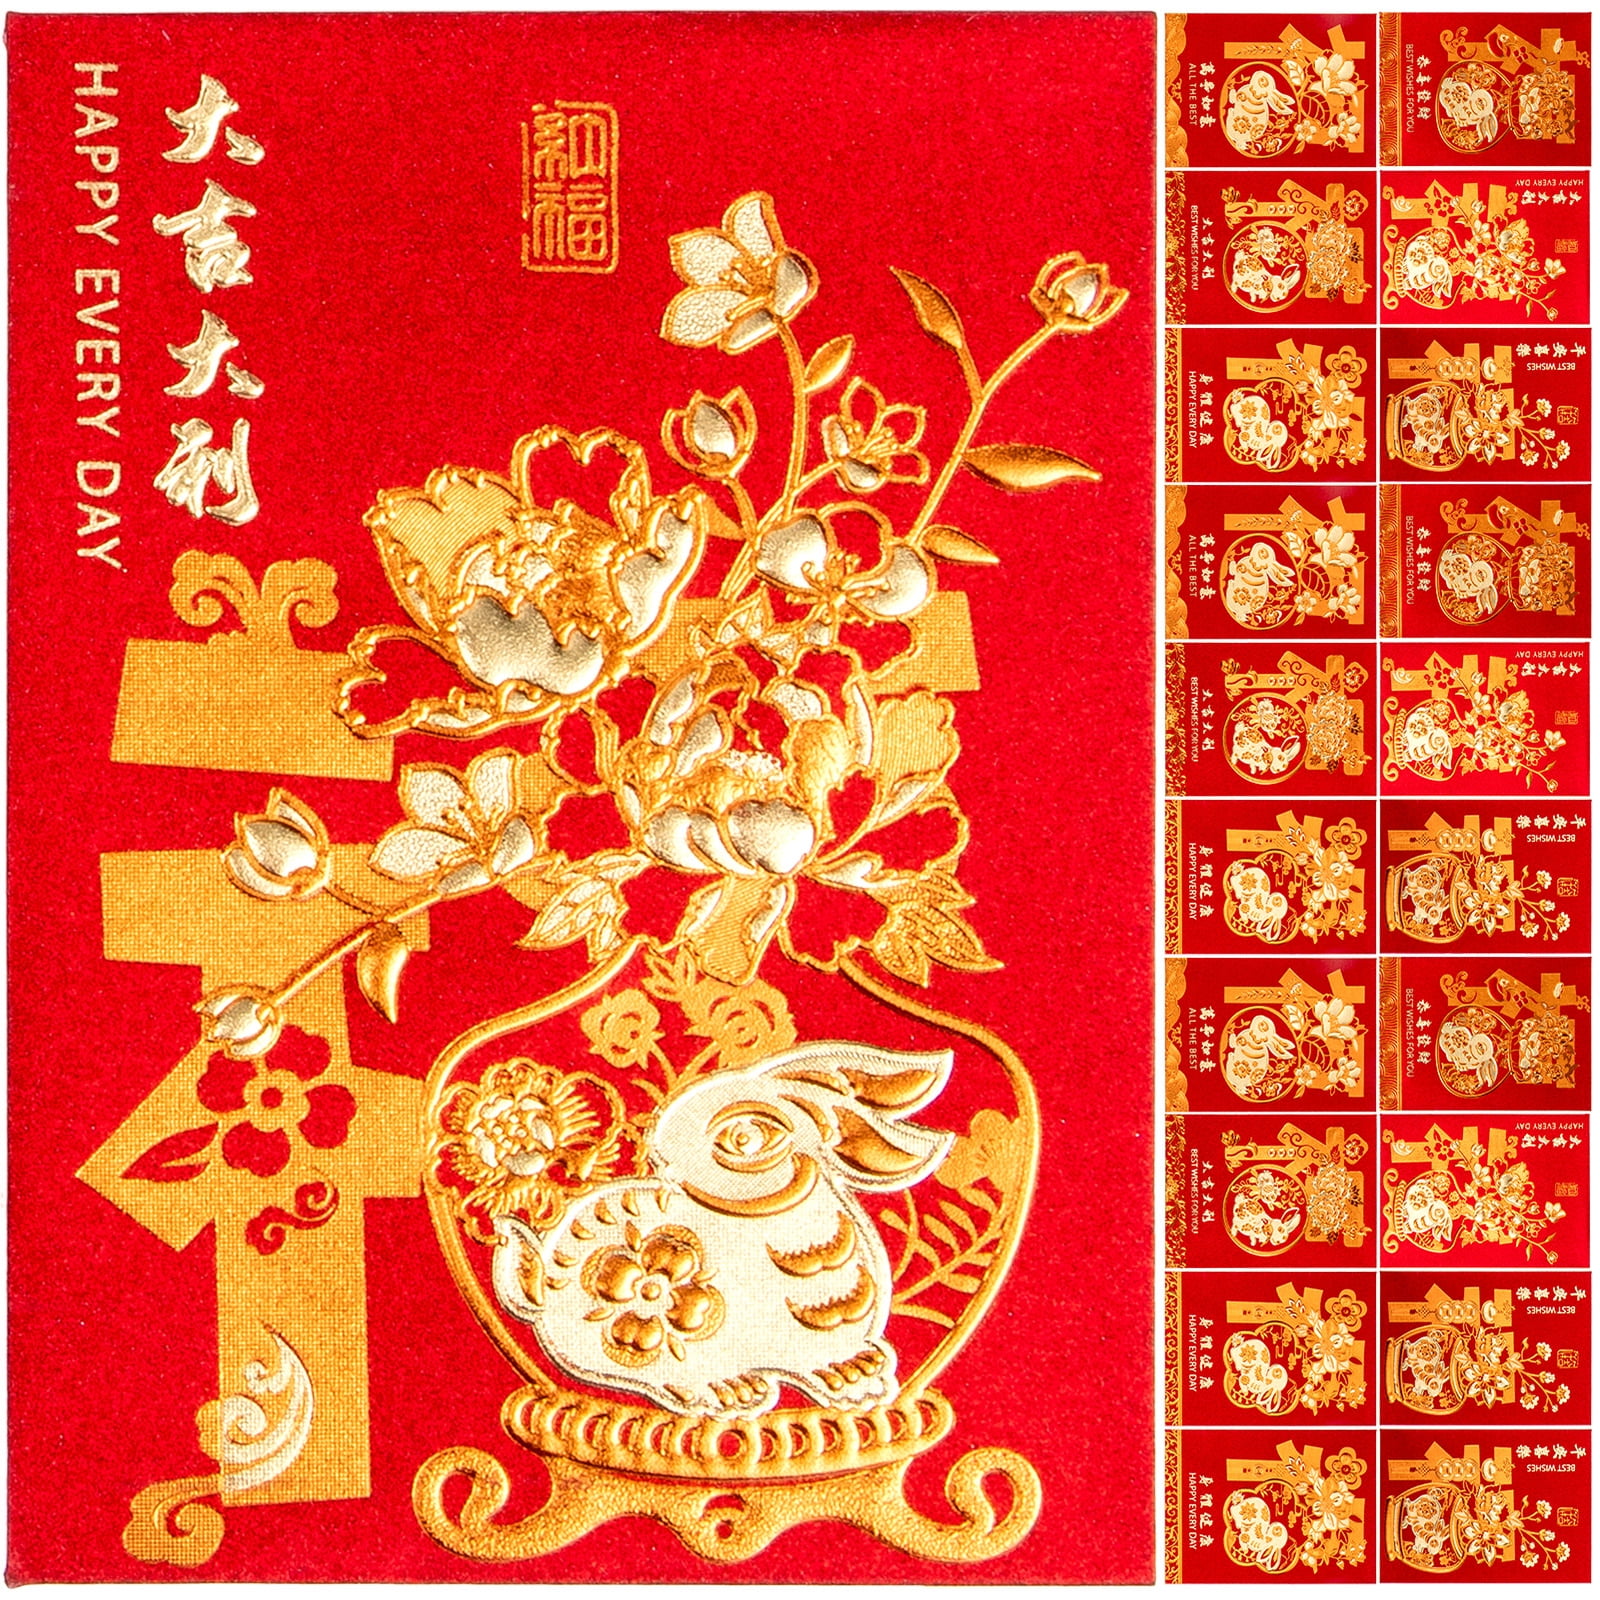  NOLITOY 60pcs Year of The Rabbit Red Envelope